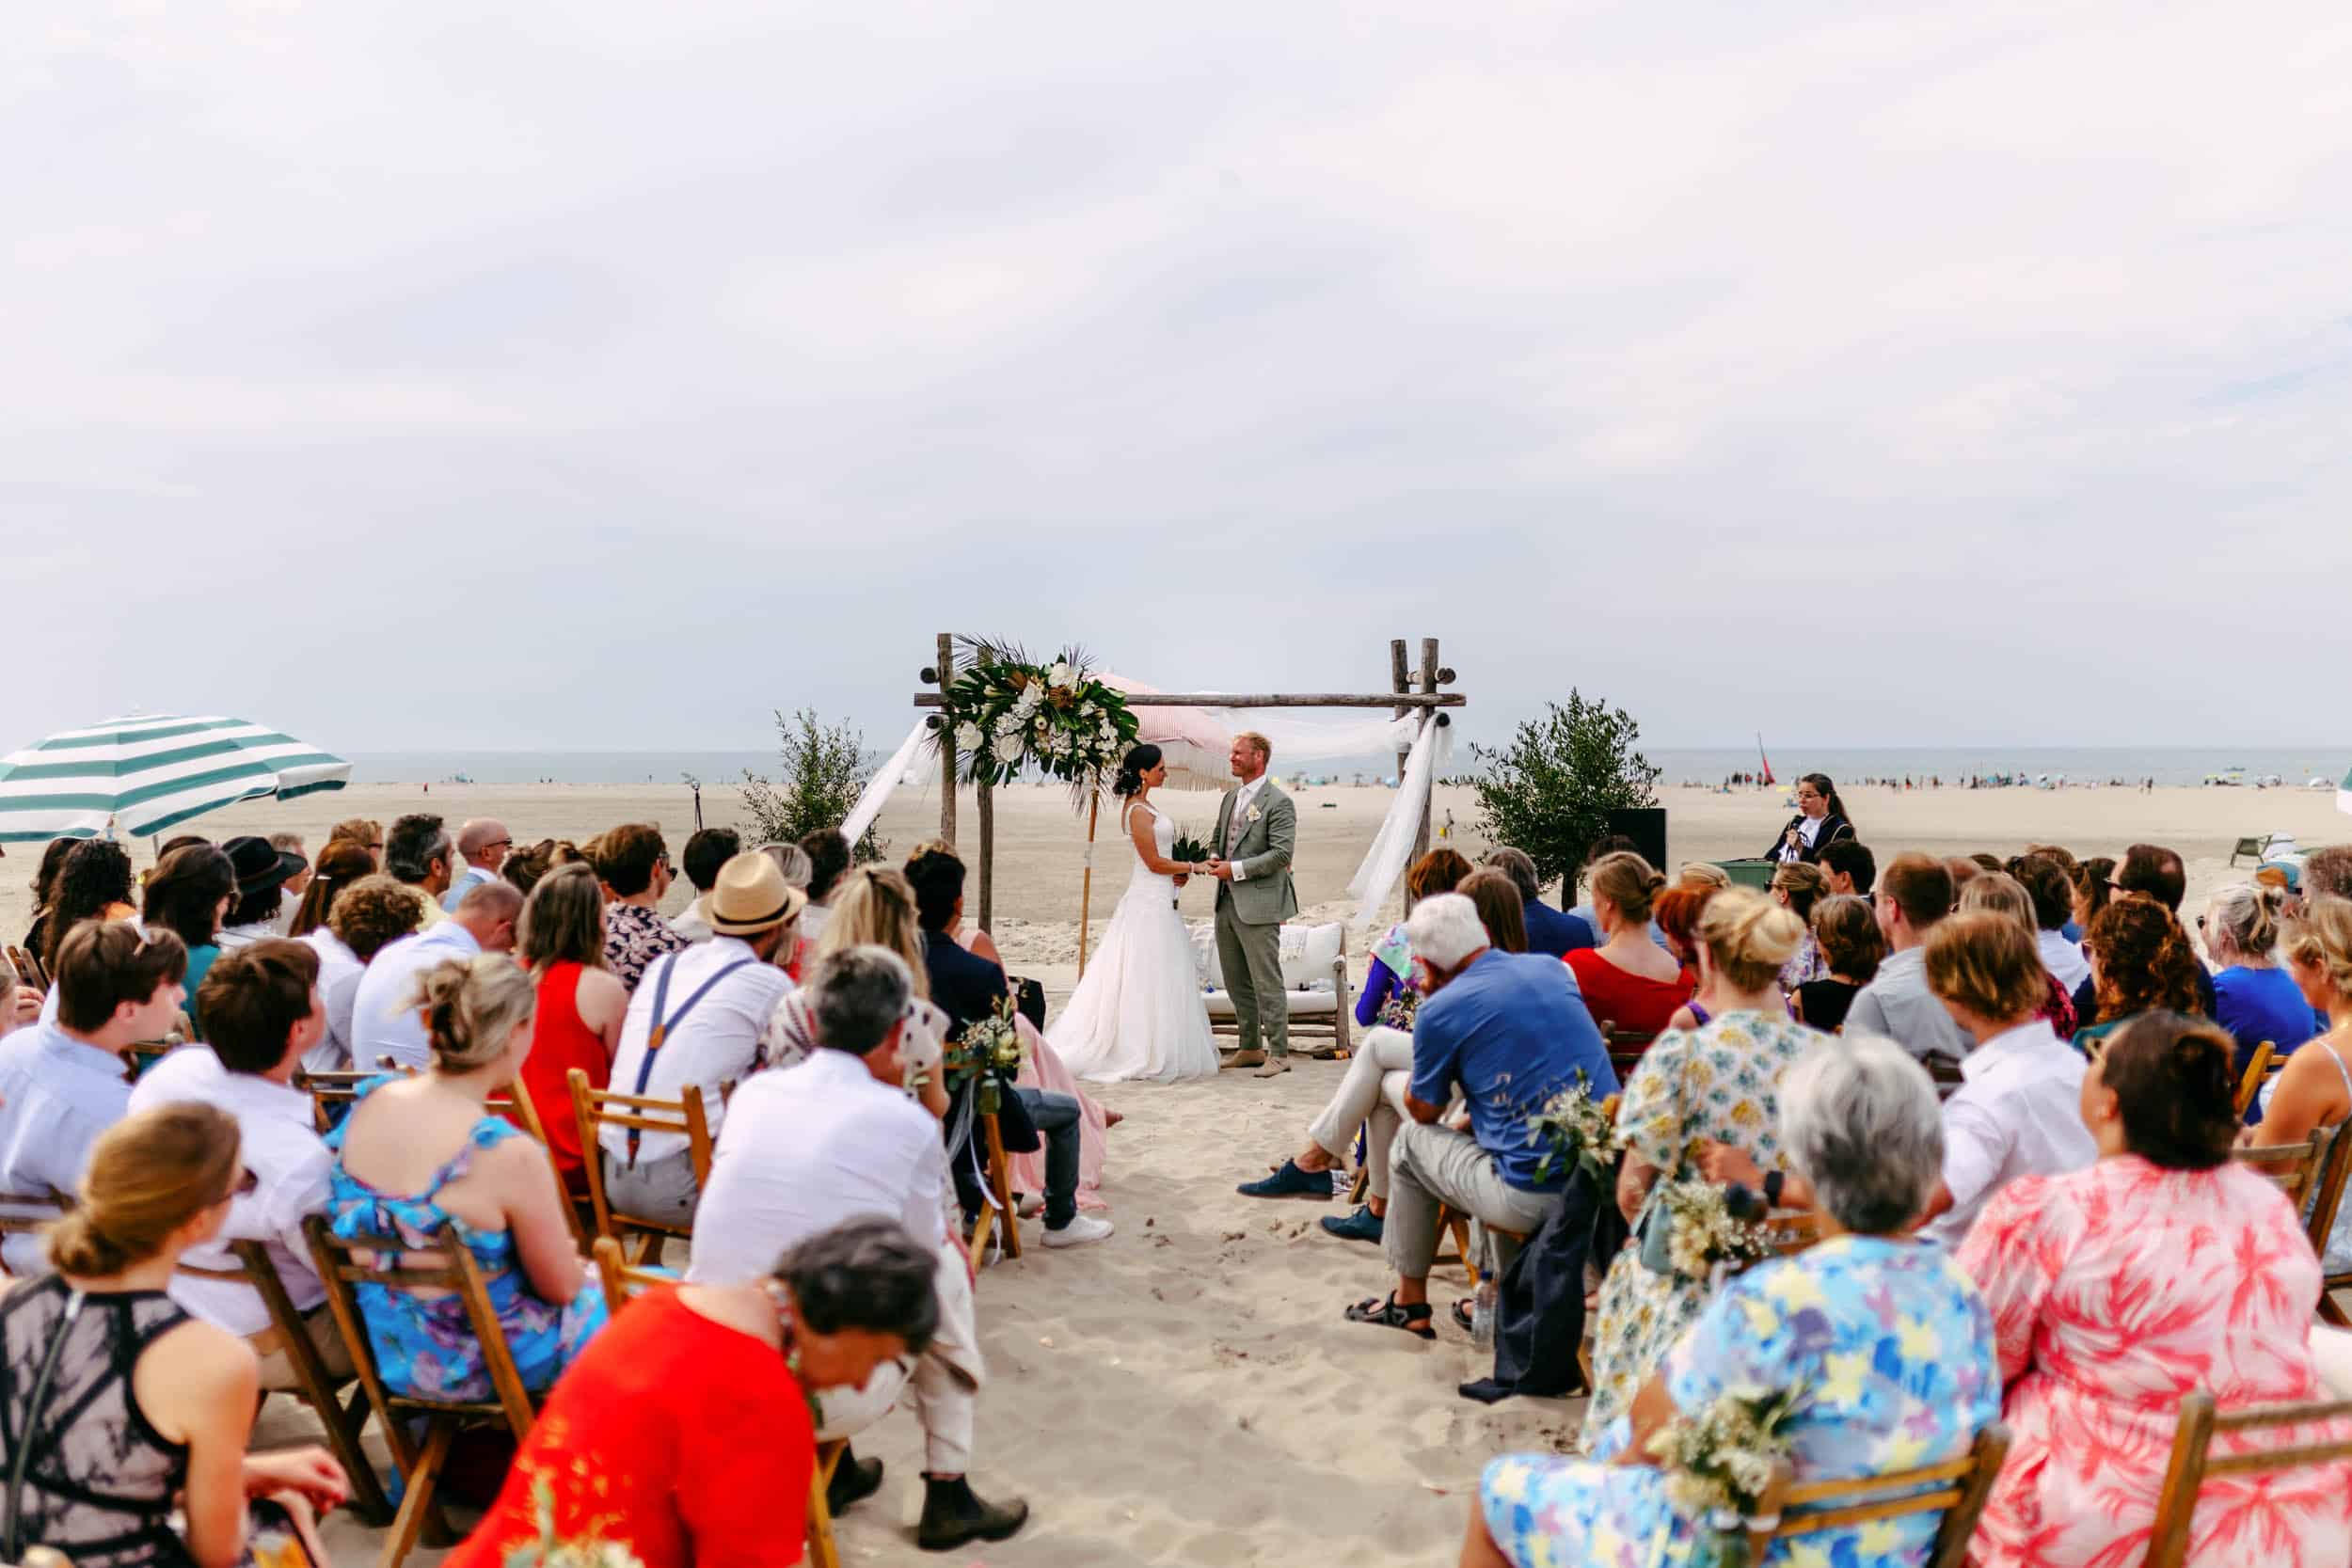 A Beachclub wedding ceremony where a bride and groom say their vows while surrounded by the soothing sounds of birds.